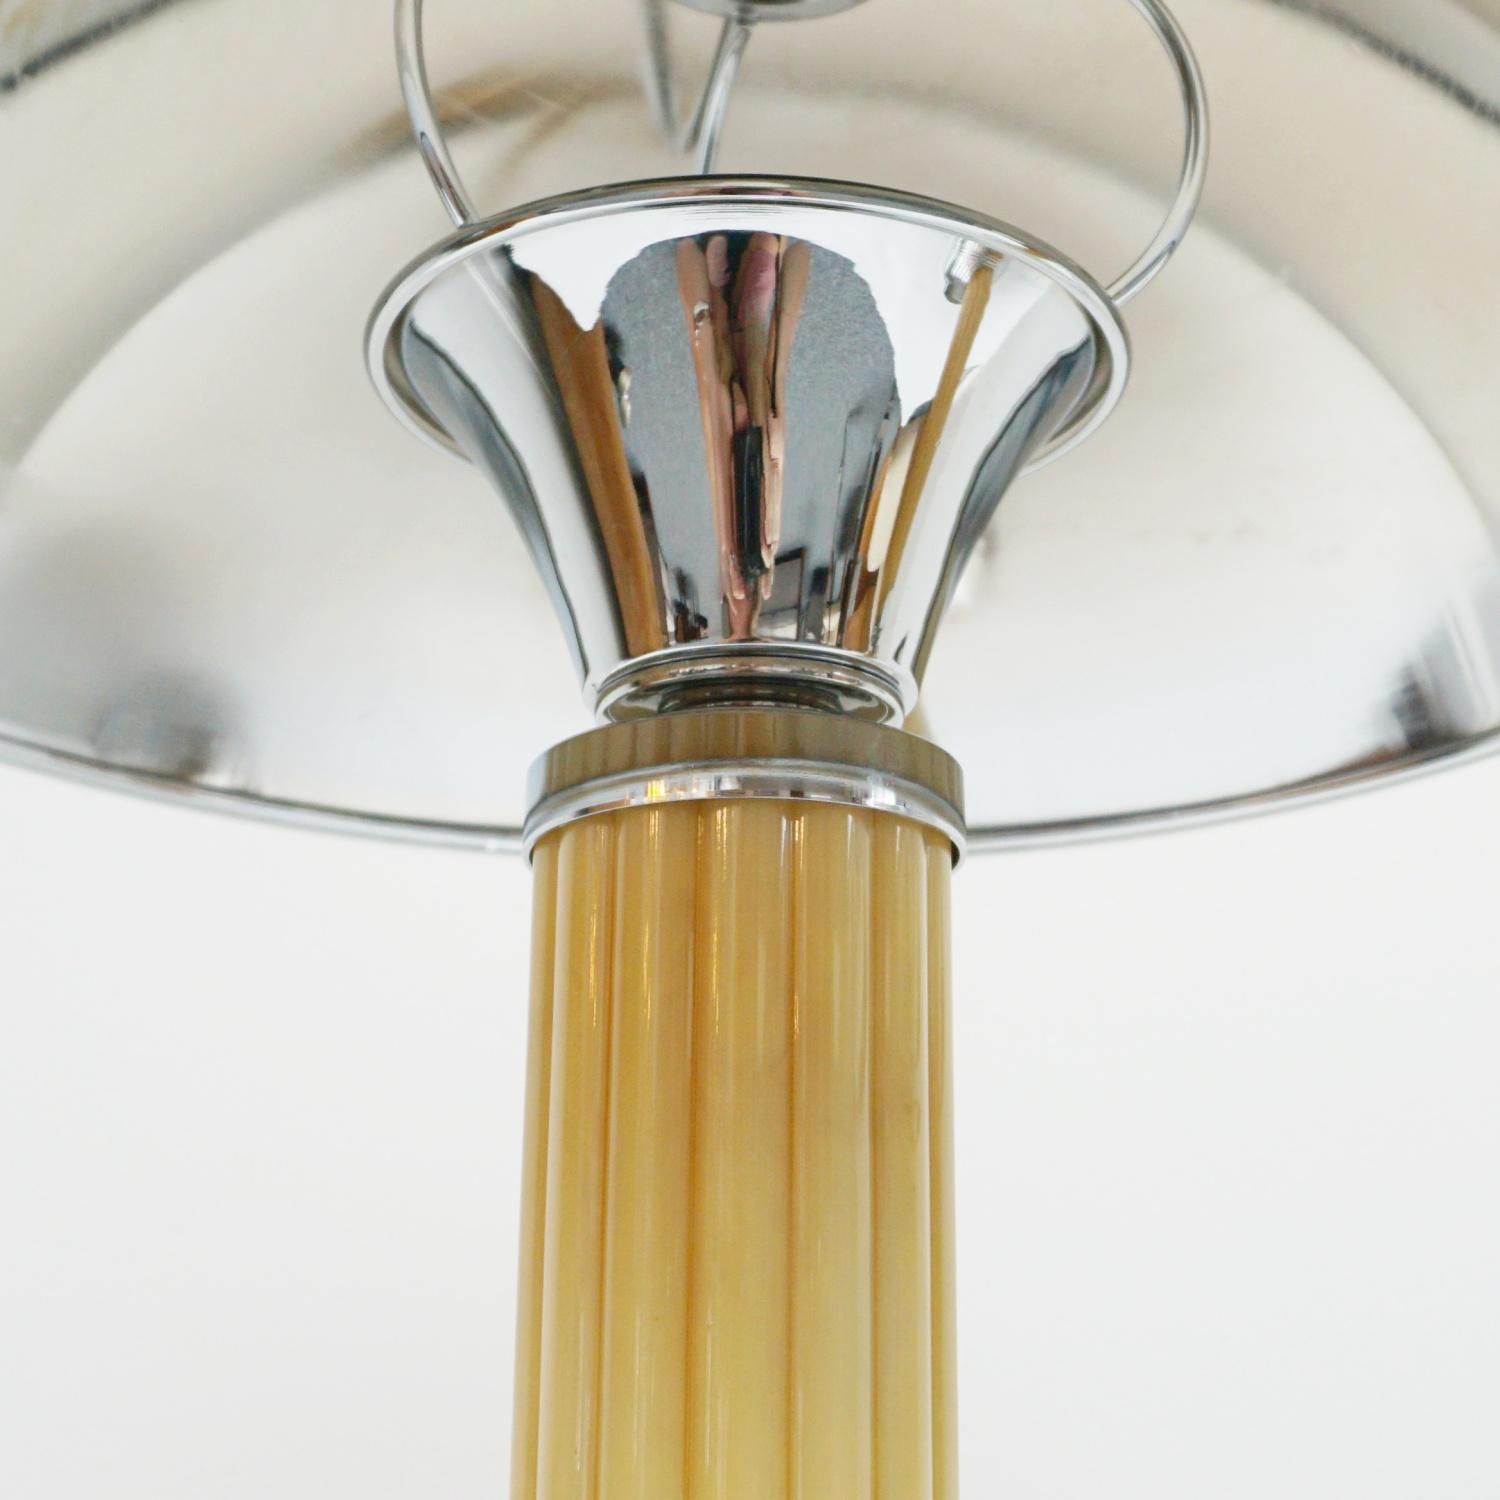 Art Deco Dome Lamps Bakelite and Chromed Metal Vintage Lighting In Excellent Condition For Sale In Forest Row, East Sussex